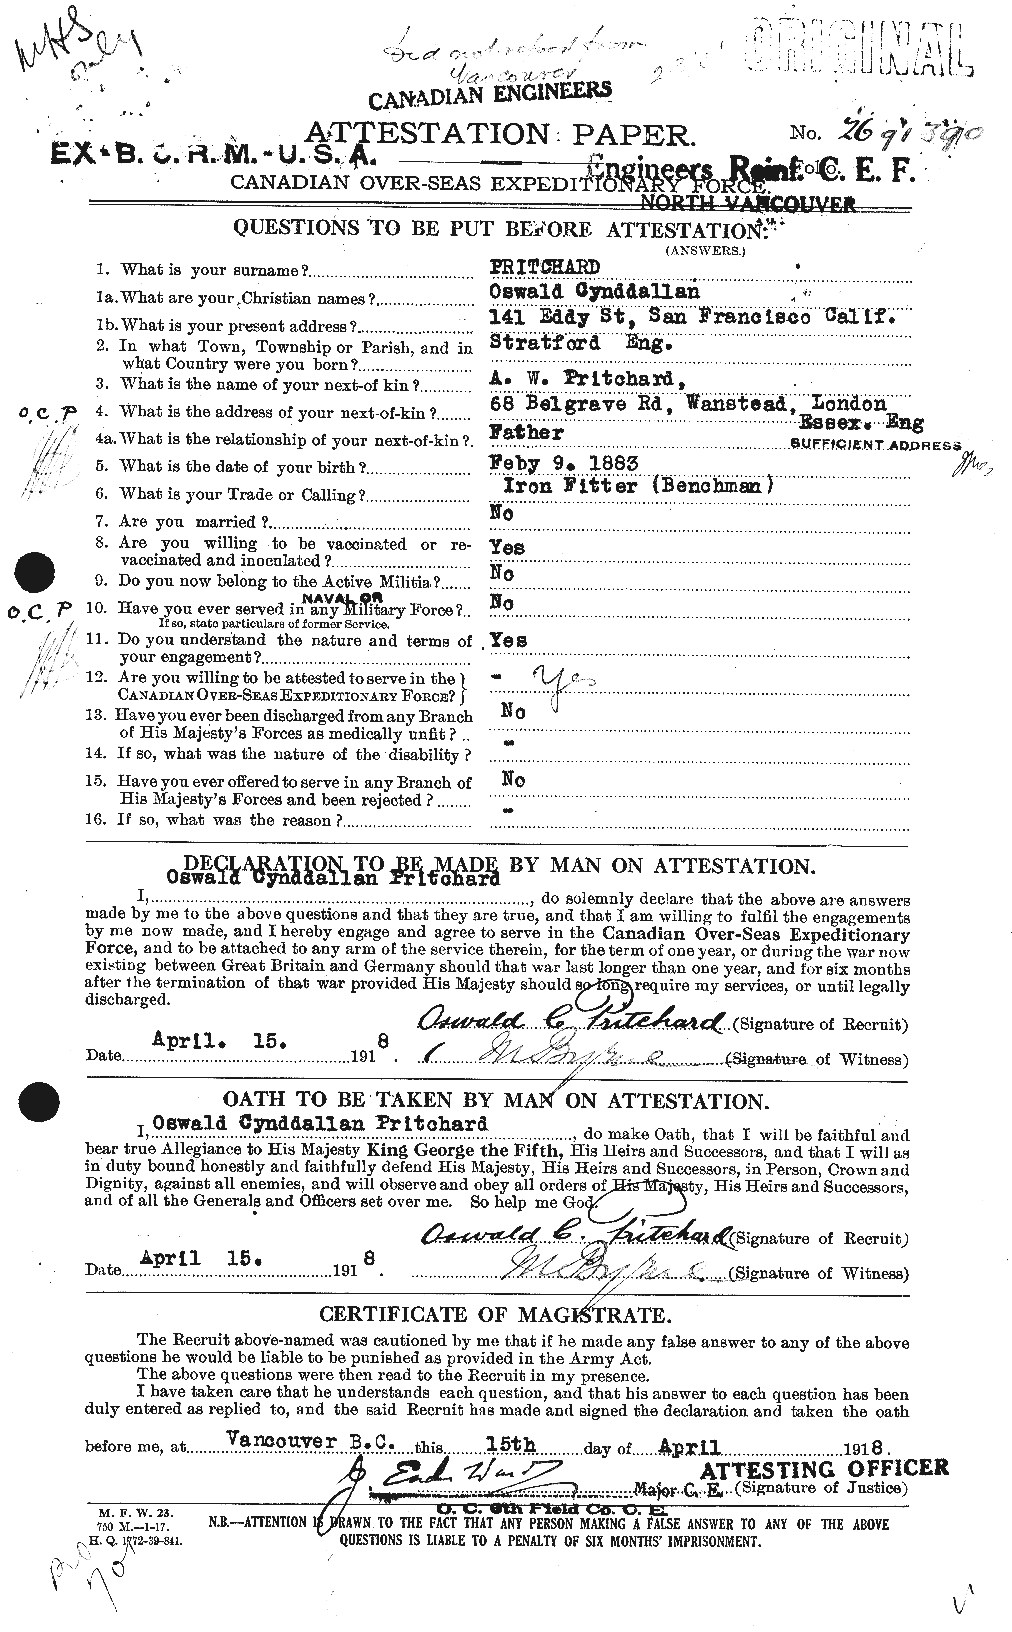 Personnel Records of the First World War - CEF 588586a